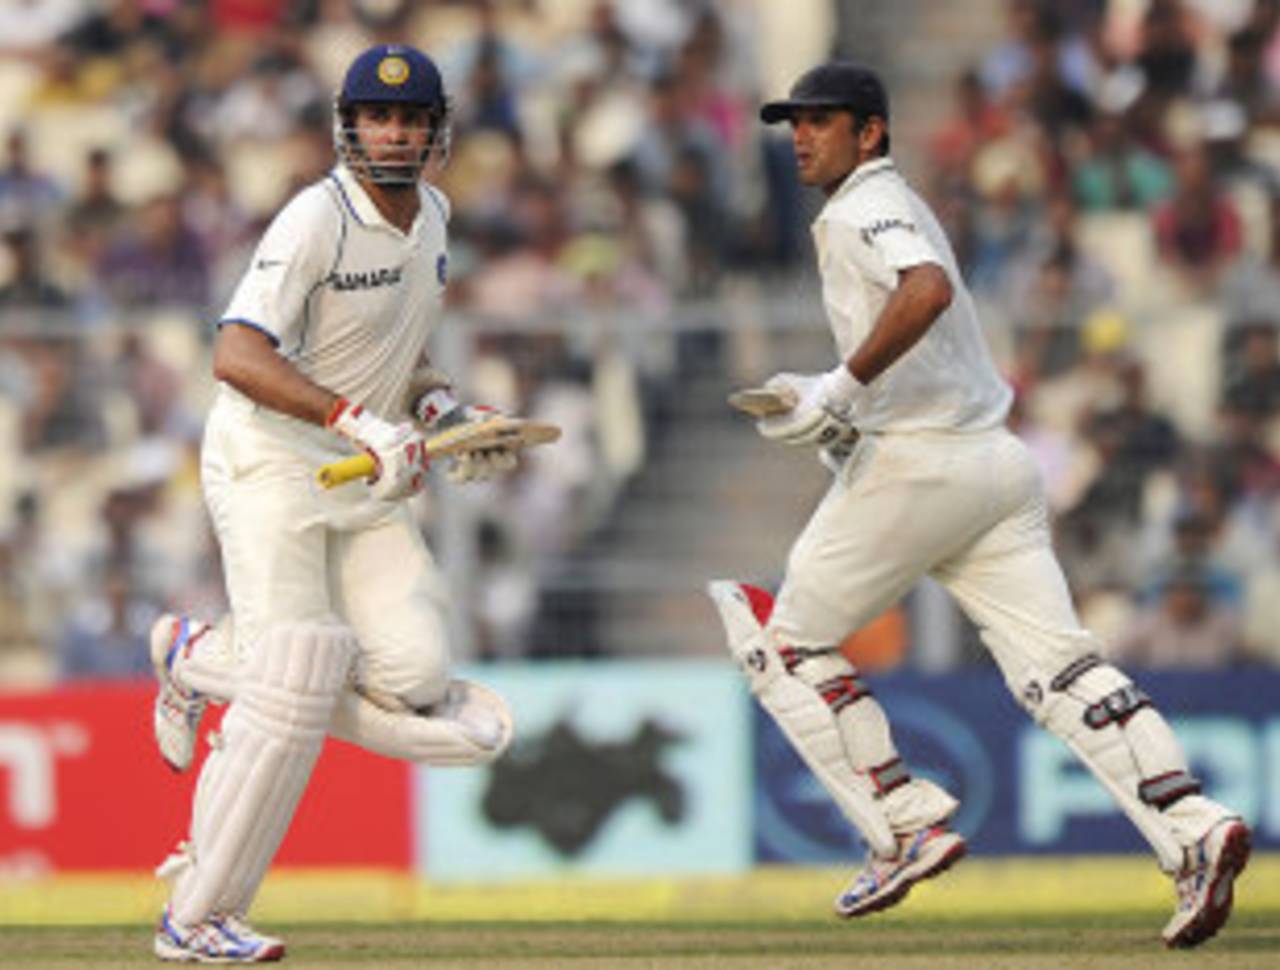 Laxman and Dravid "dissolved into one another more harmoniously, more significantly, than any other Indian duo"&nbsp;&nbsp;&bull;&nbsp;&nbsp;AFP